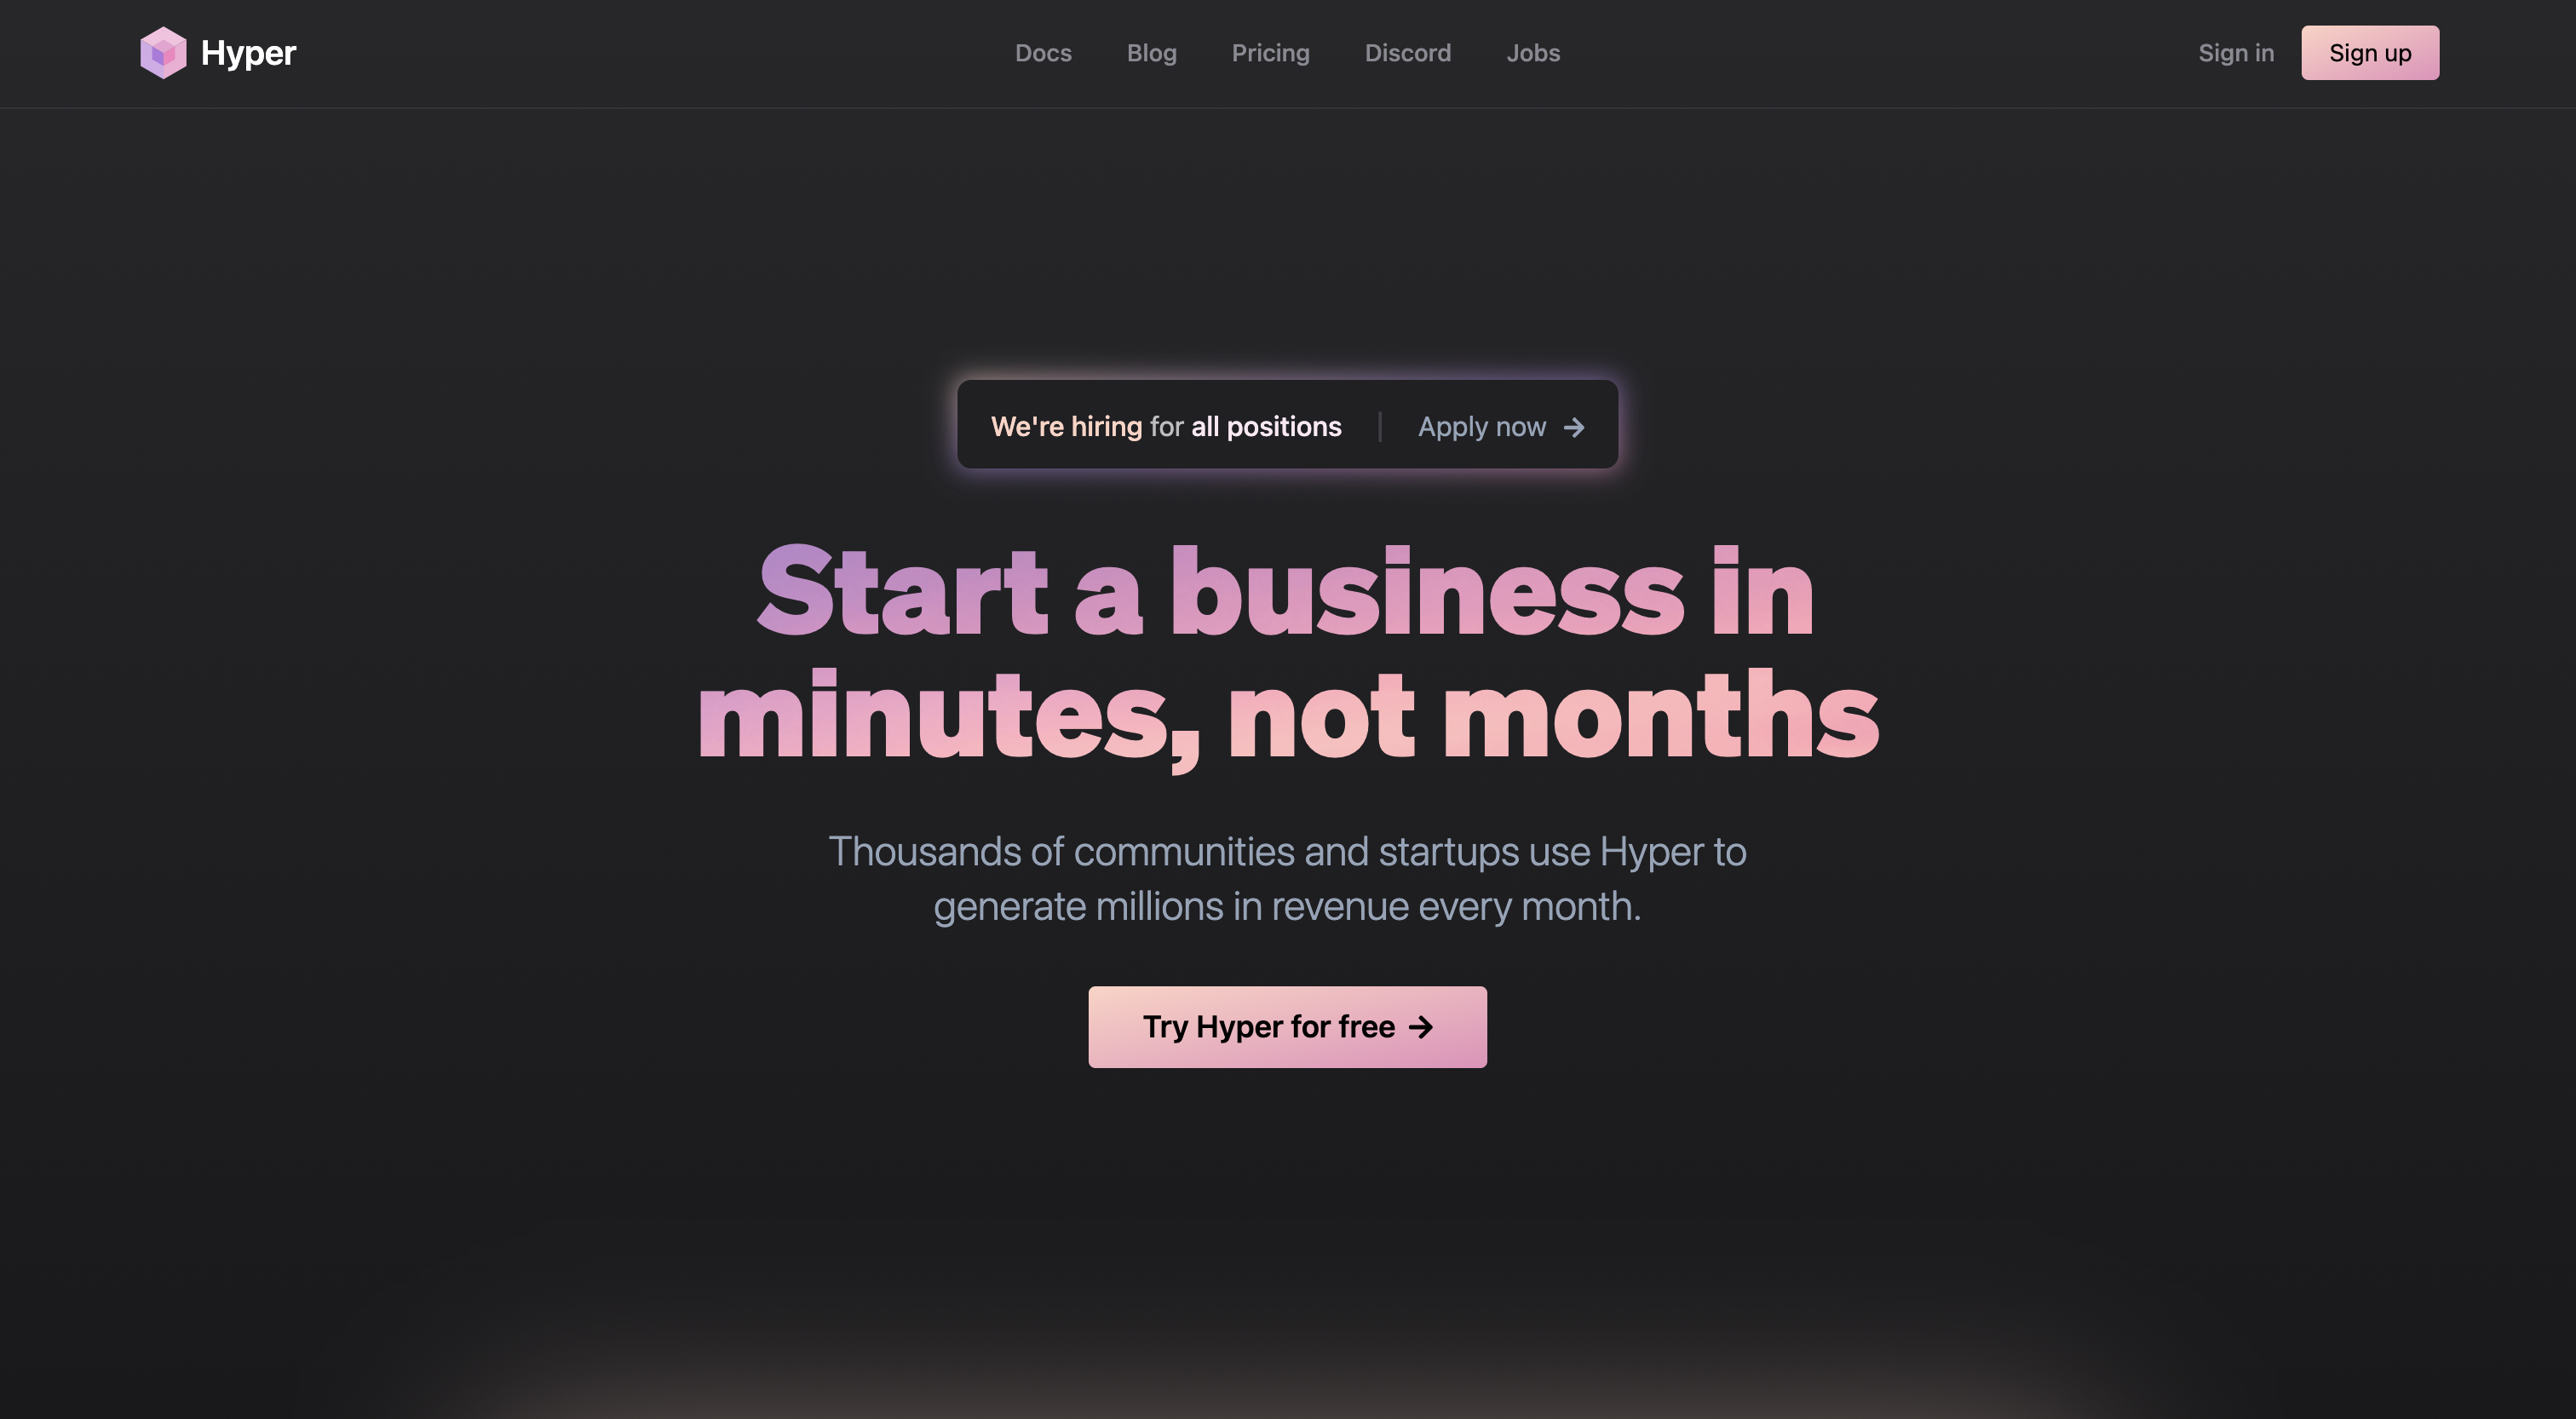 The Hyper landing page